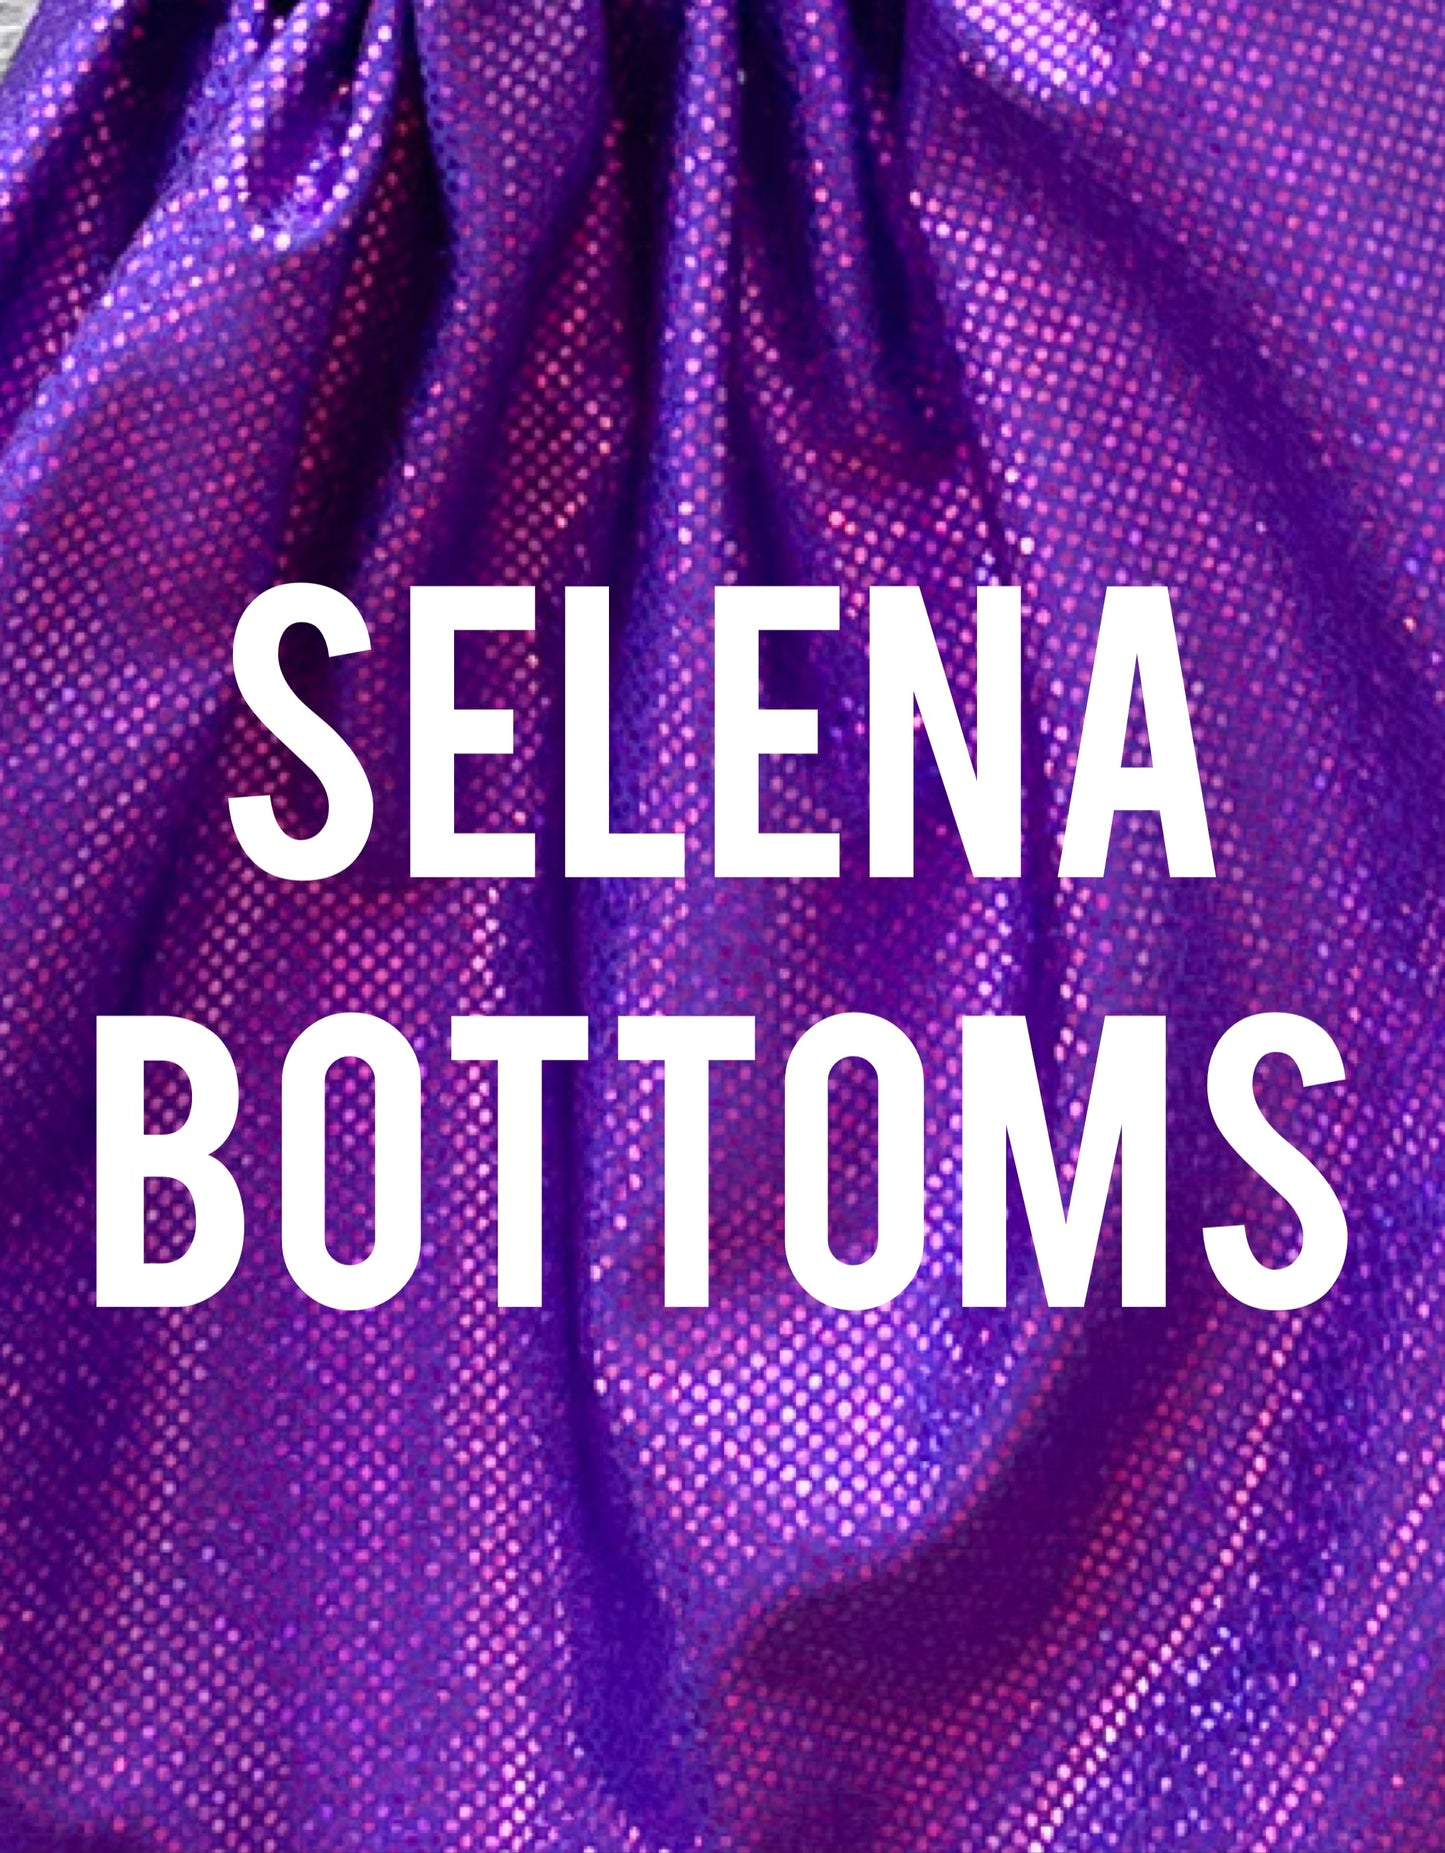 Anything for Selena’s Bottoms